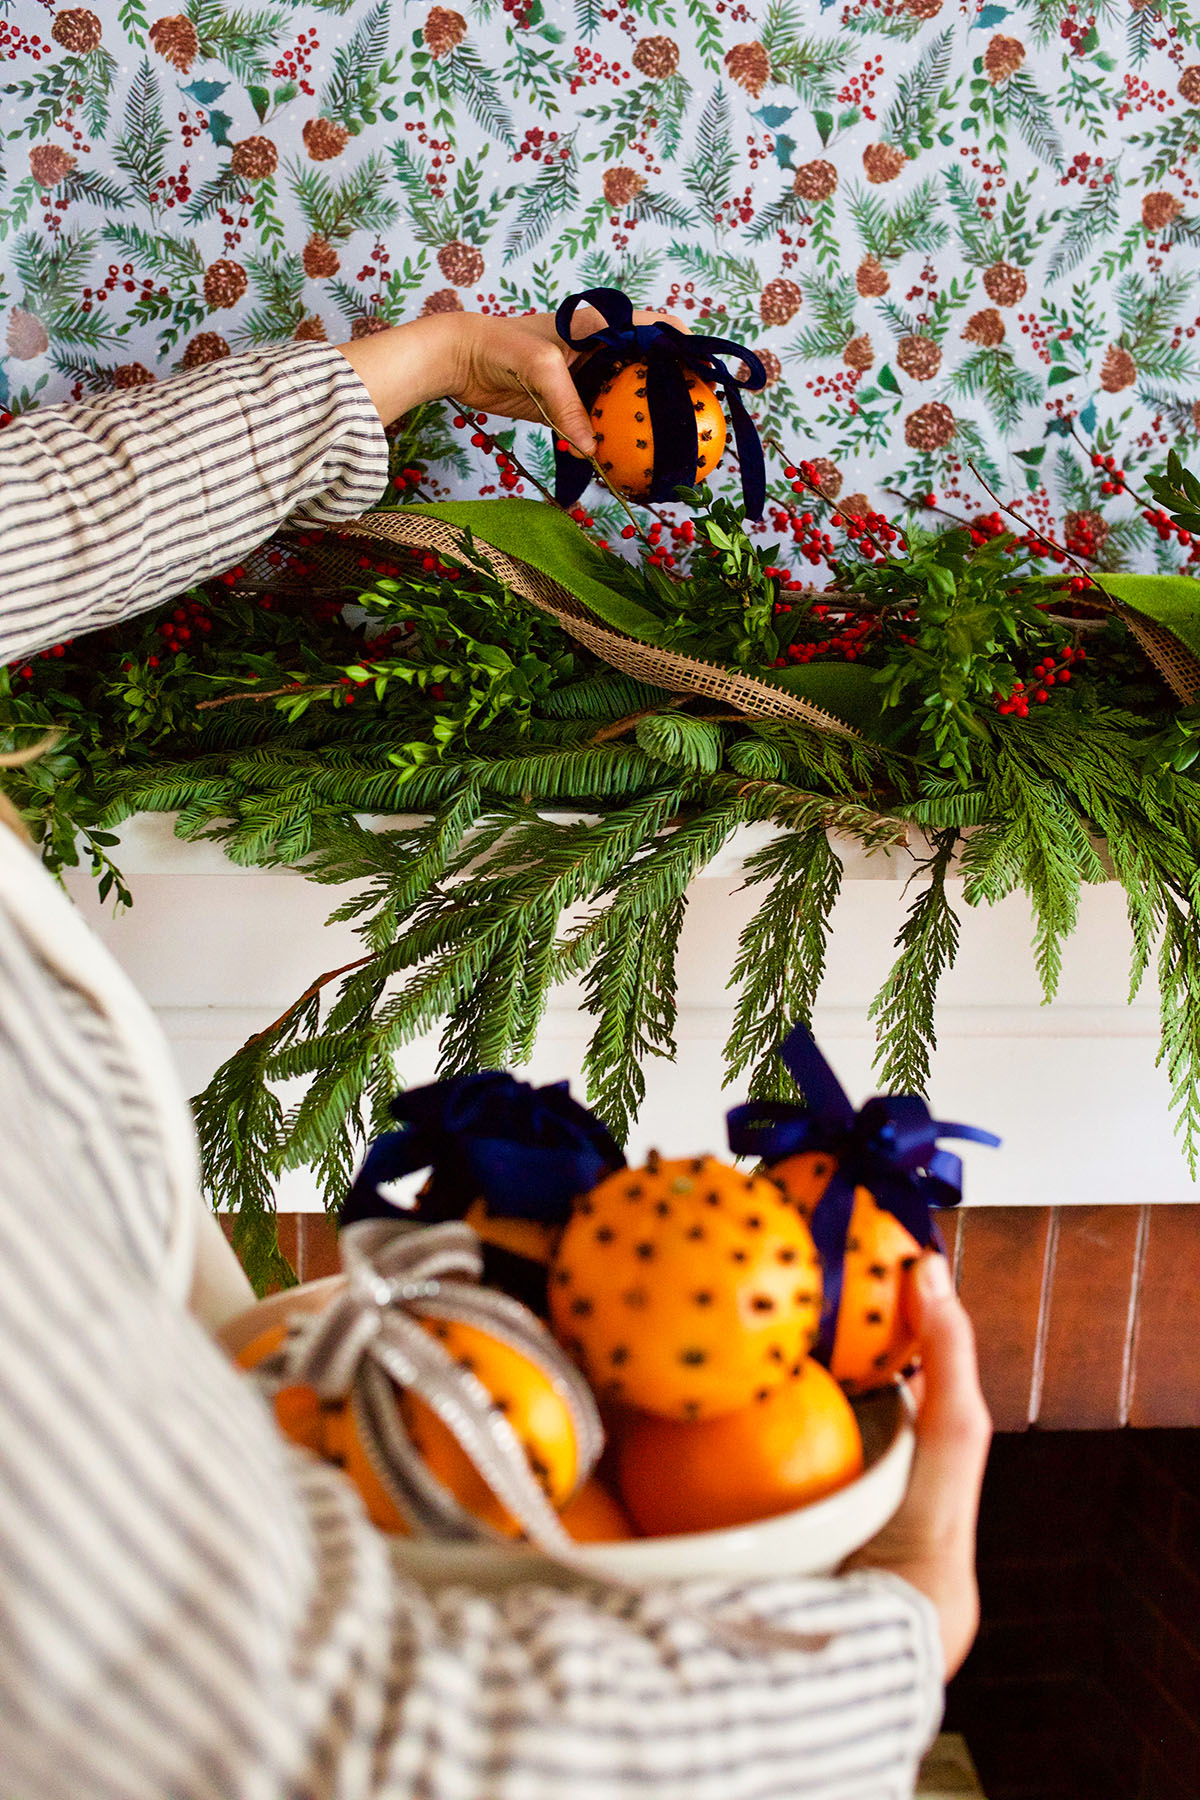 8 Ideas to Create a Natural Holiday Home | Herbal Academy | Learn how to use beautiful botanicals and herbal crafts in the natural holiday home to add a special element to the season that is reminiscent of the past.